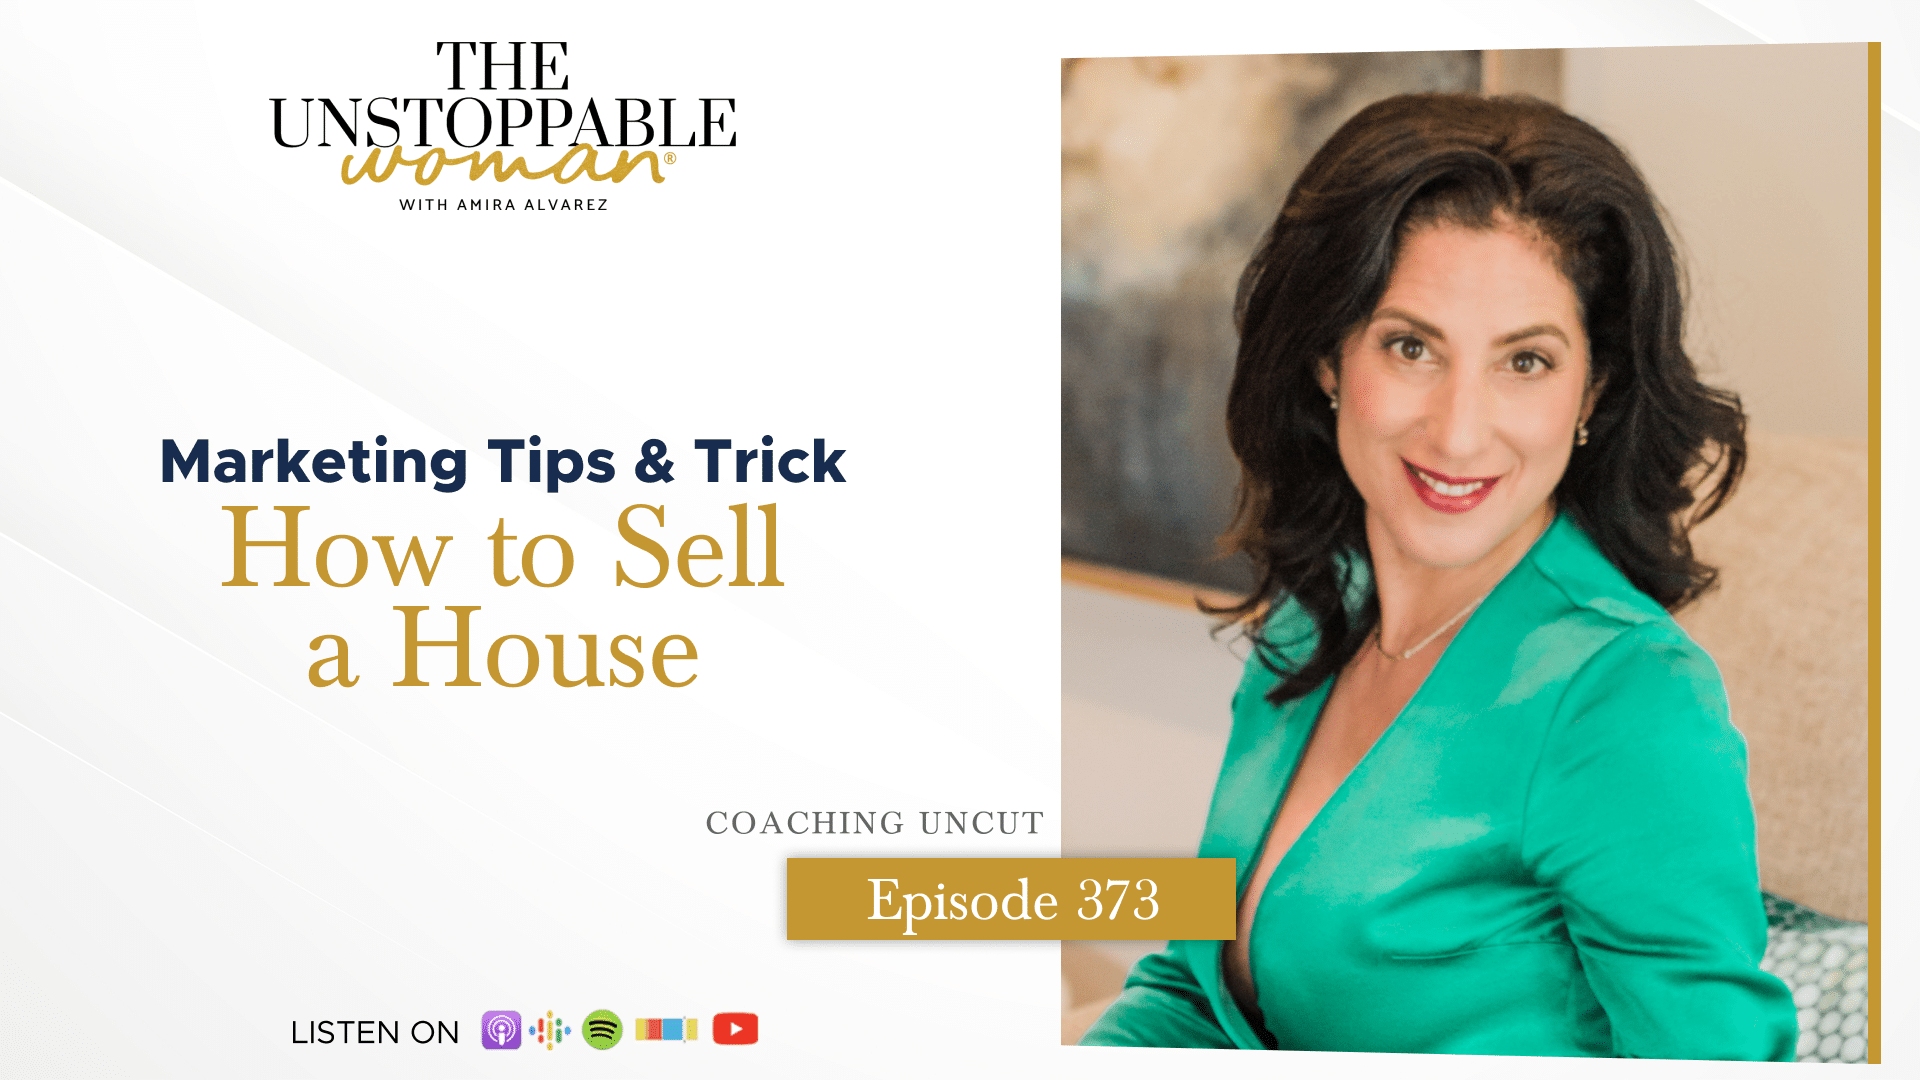 [Image: Marketing Tips & Trick | How to Sell a House ]